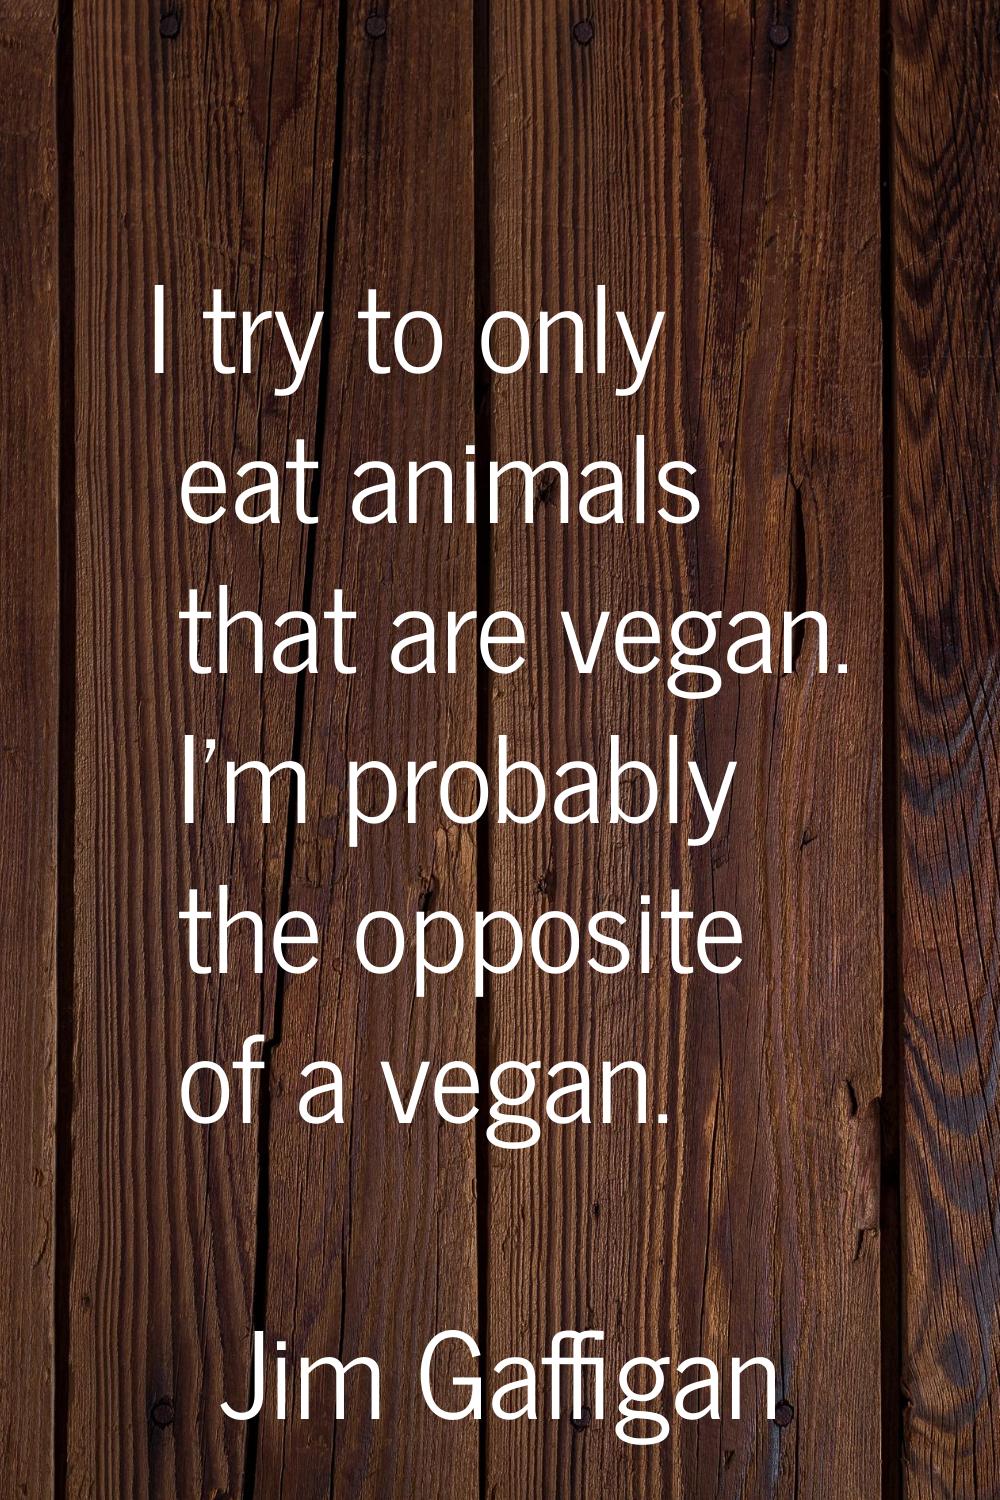 I try to only eat animals that are vegan. I'm probably the opposite of a vegan.